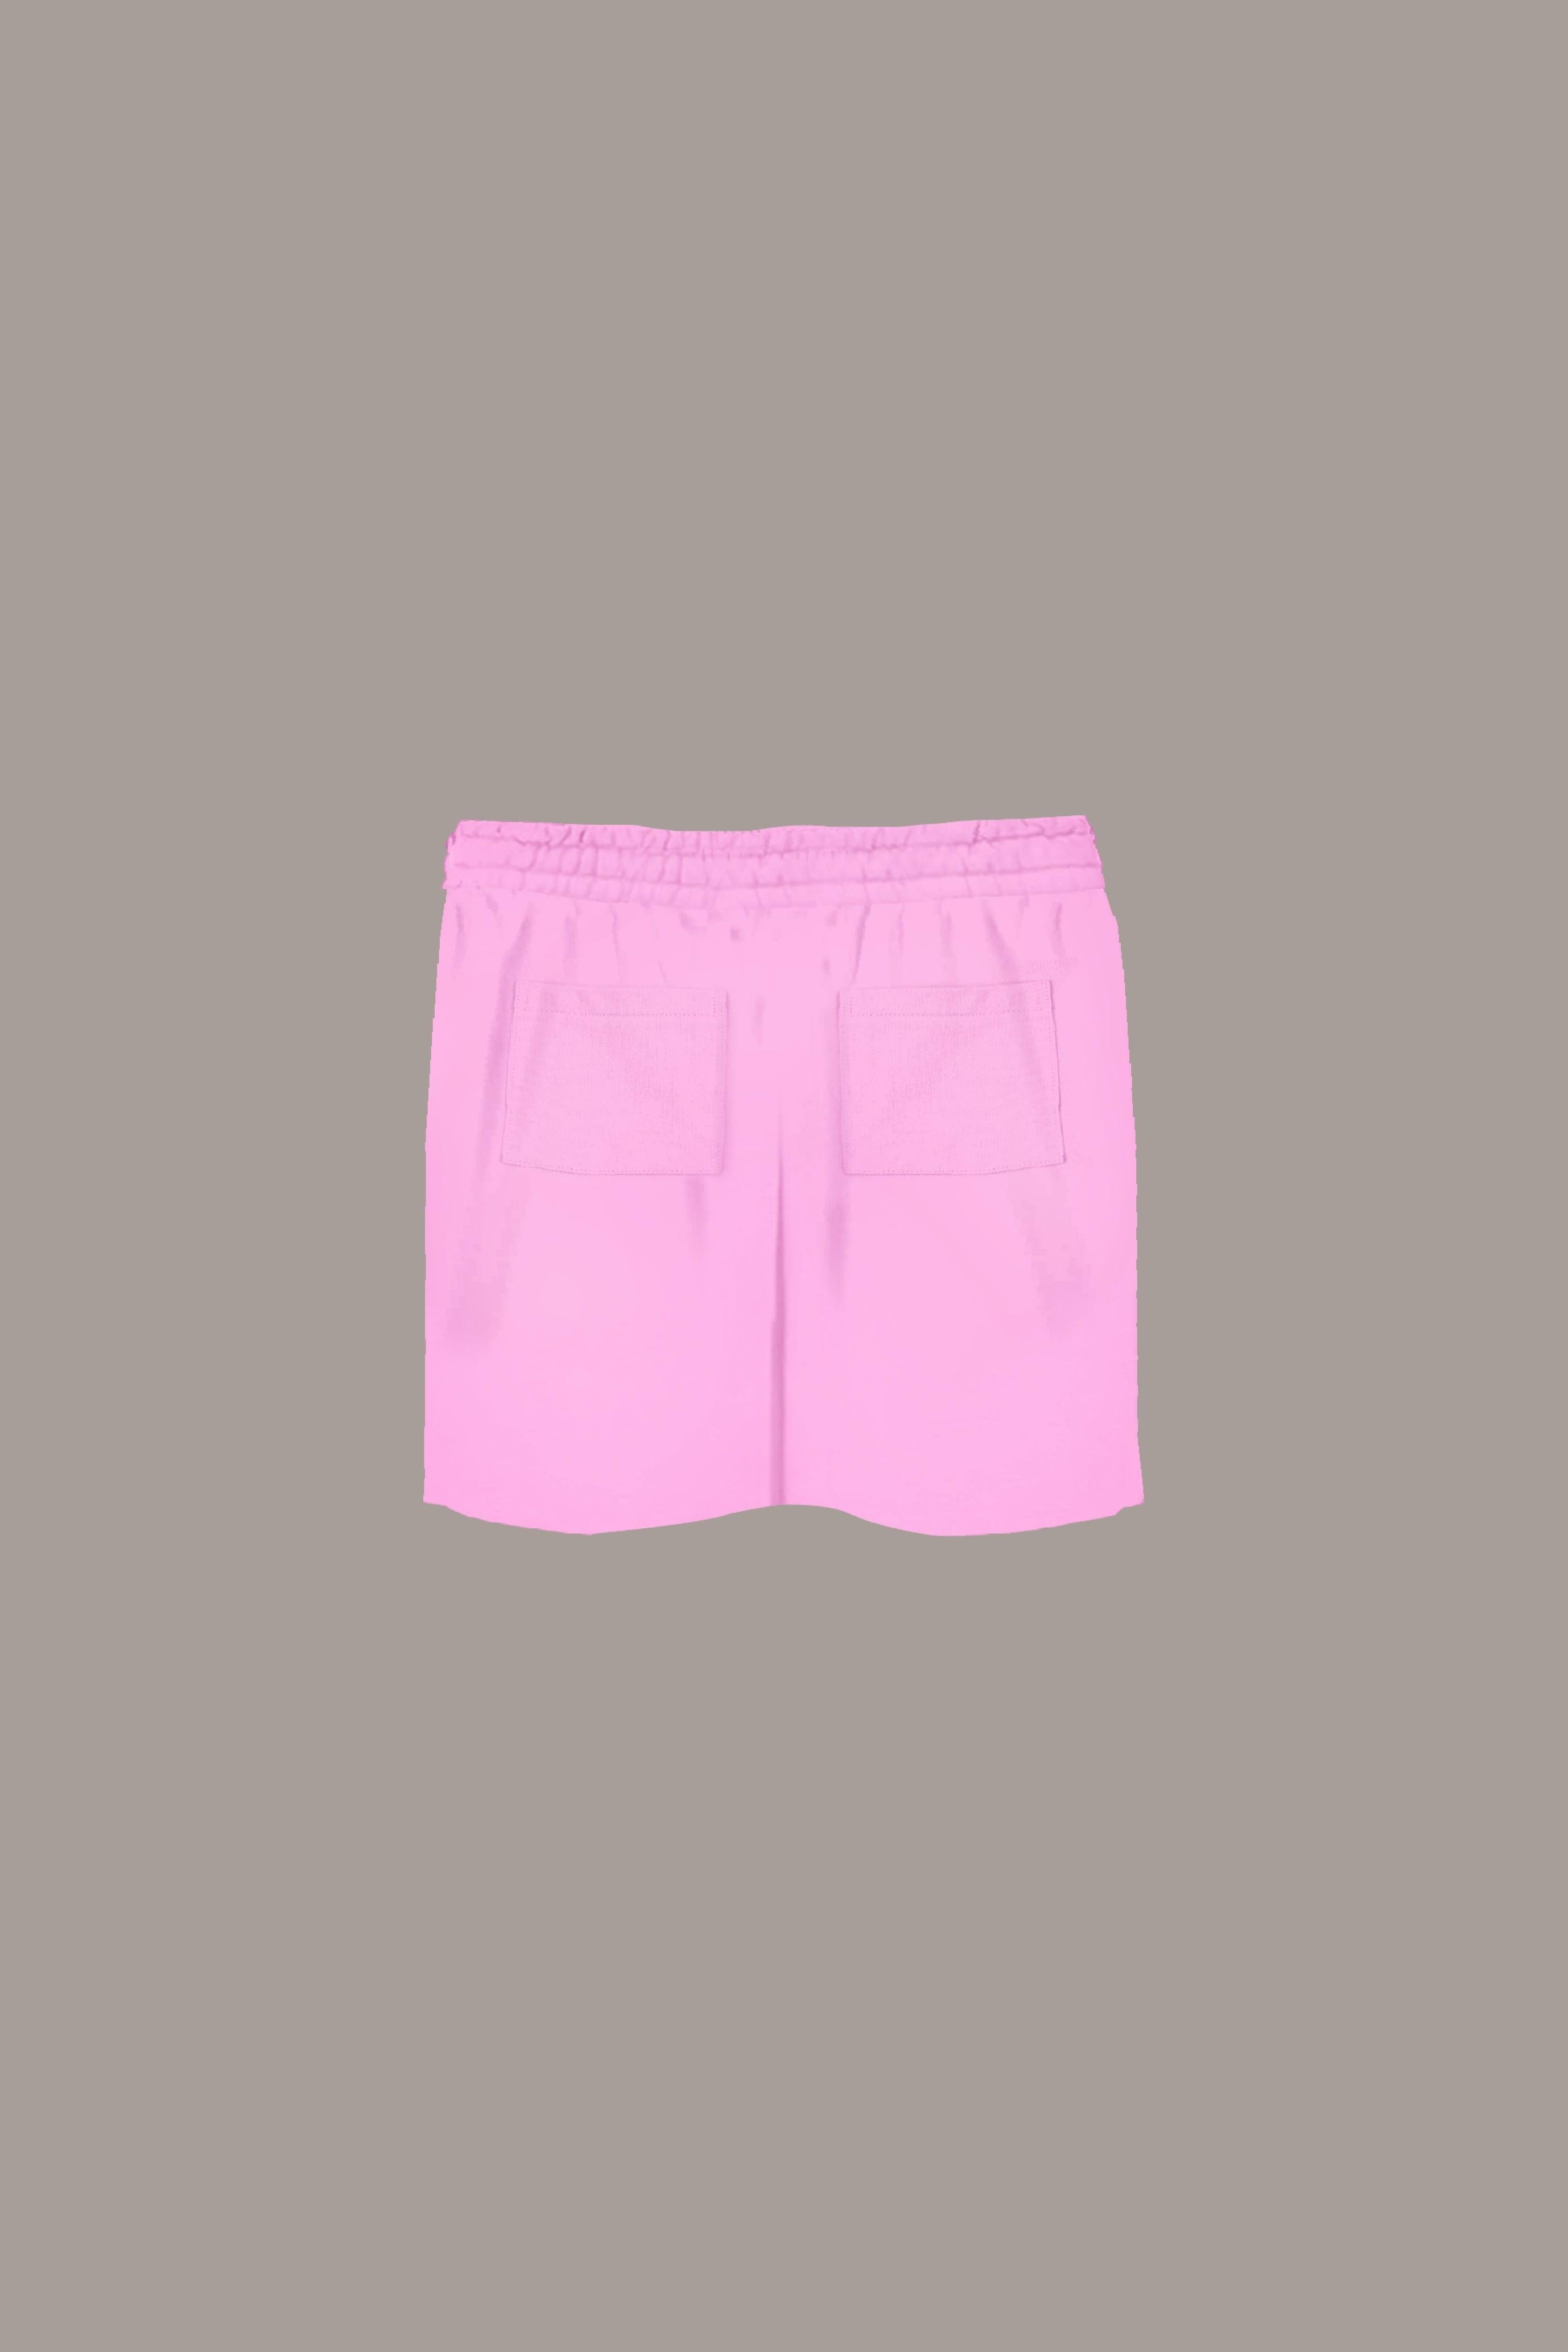 **LIMITED DECONSTRUCTED PATCH SHORTS - **LIMITED DECONSTRUCTED PATCH SHORTS - ROSE IN GOOD FAITH